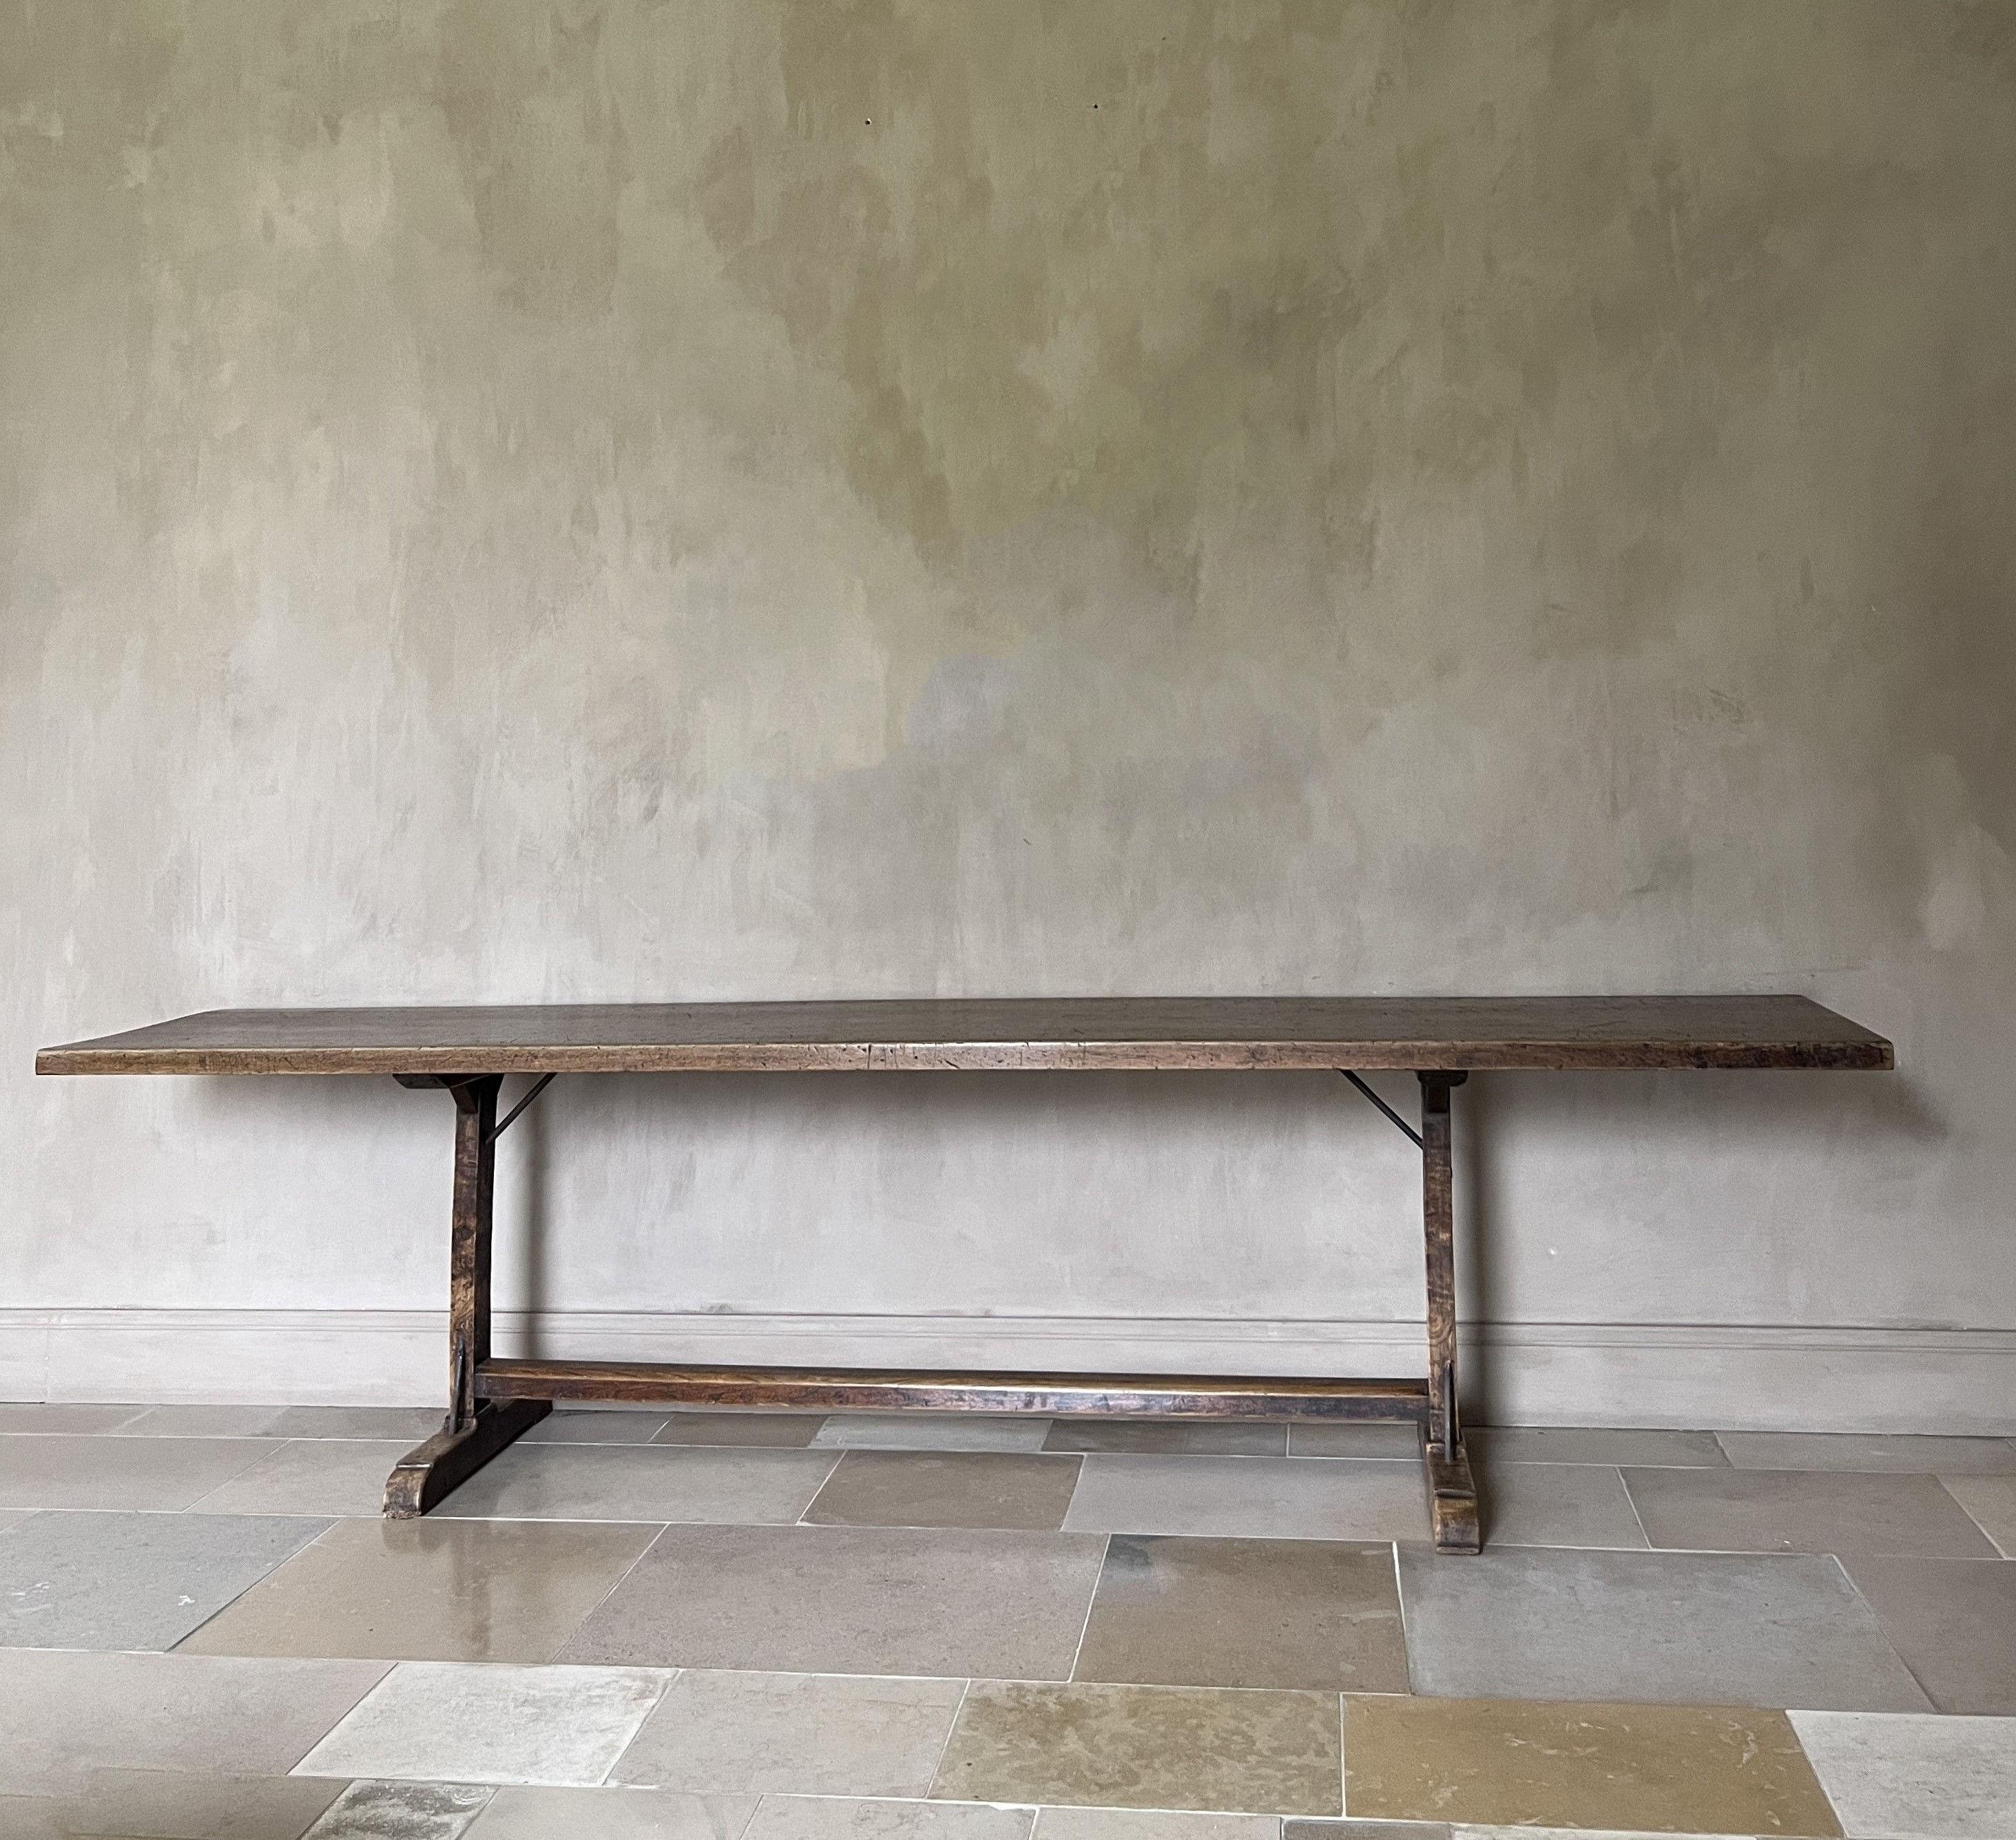 A large 19th century Pyrinee console table. The beautifully patined one slab walnut top on colomn feet in the same wood. Tables like these were made for centuries in largely the same manner. Knowhow and sense for proportion was handed down for